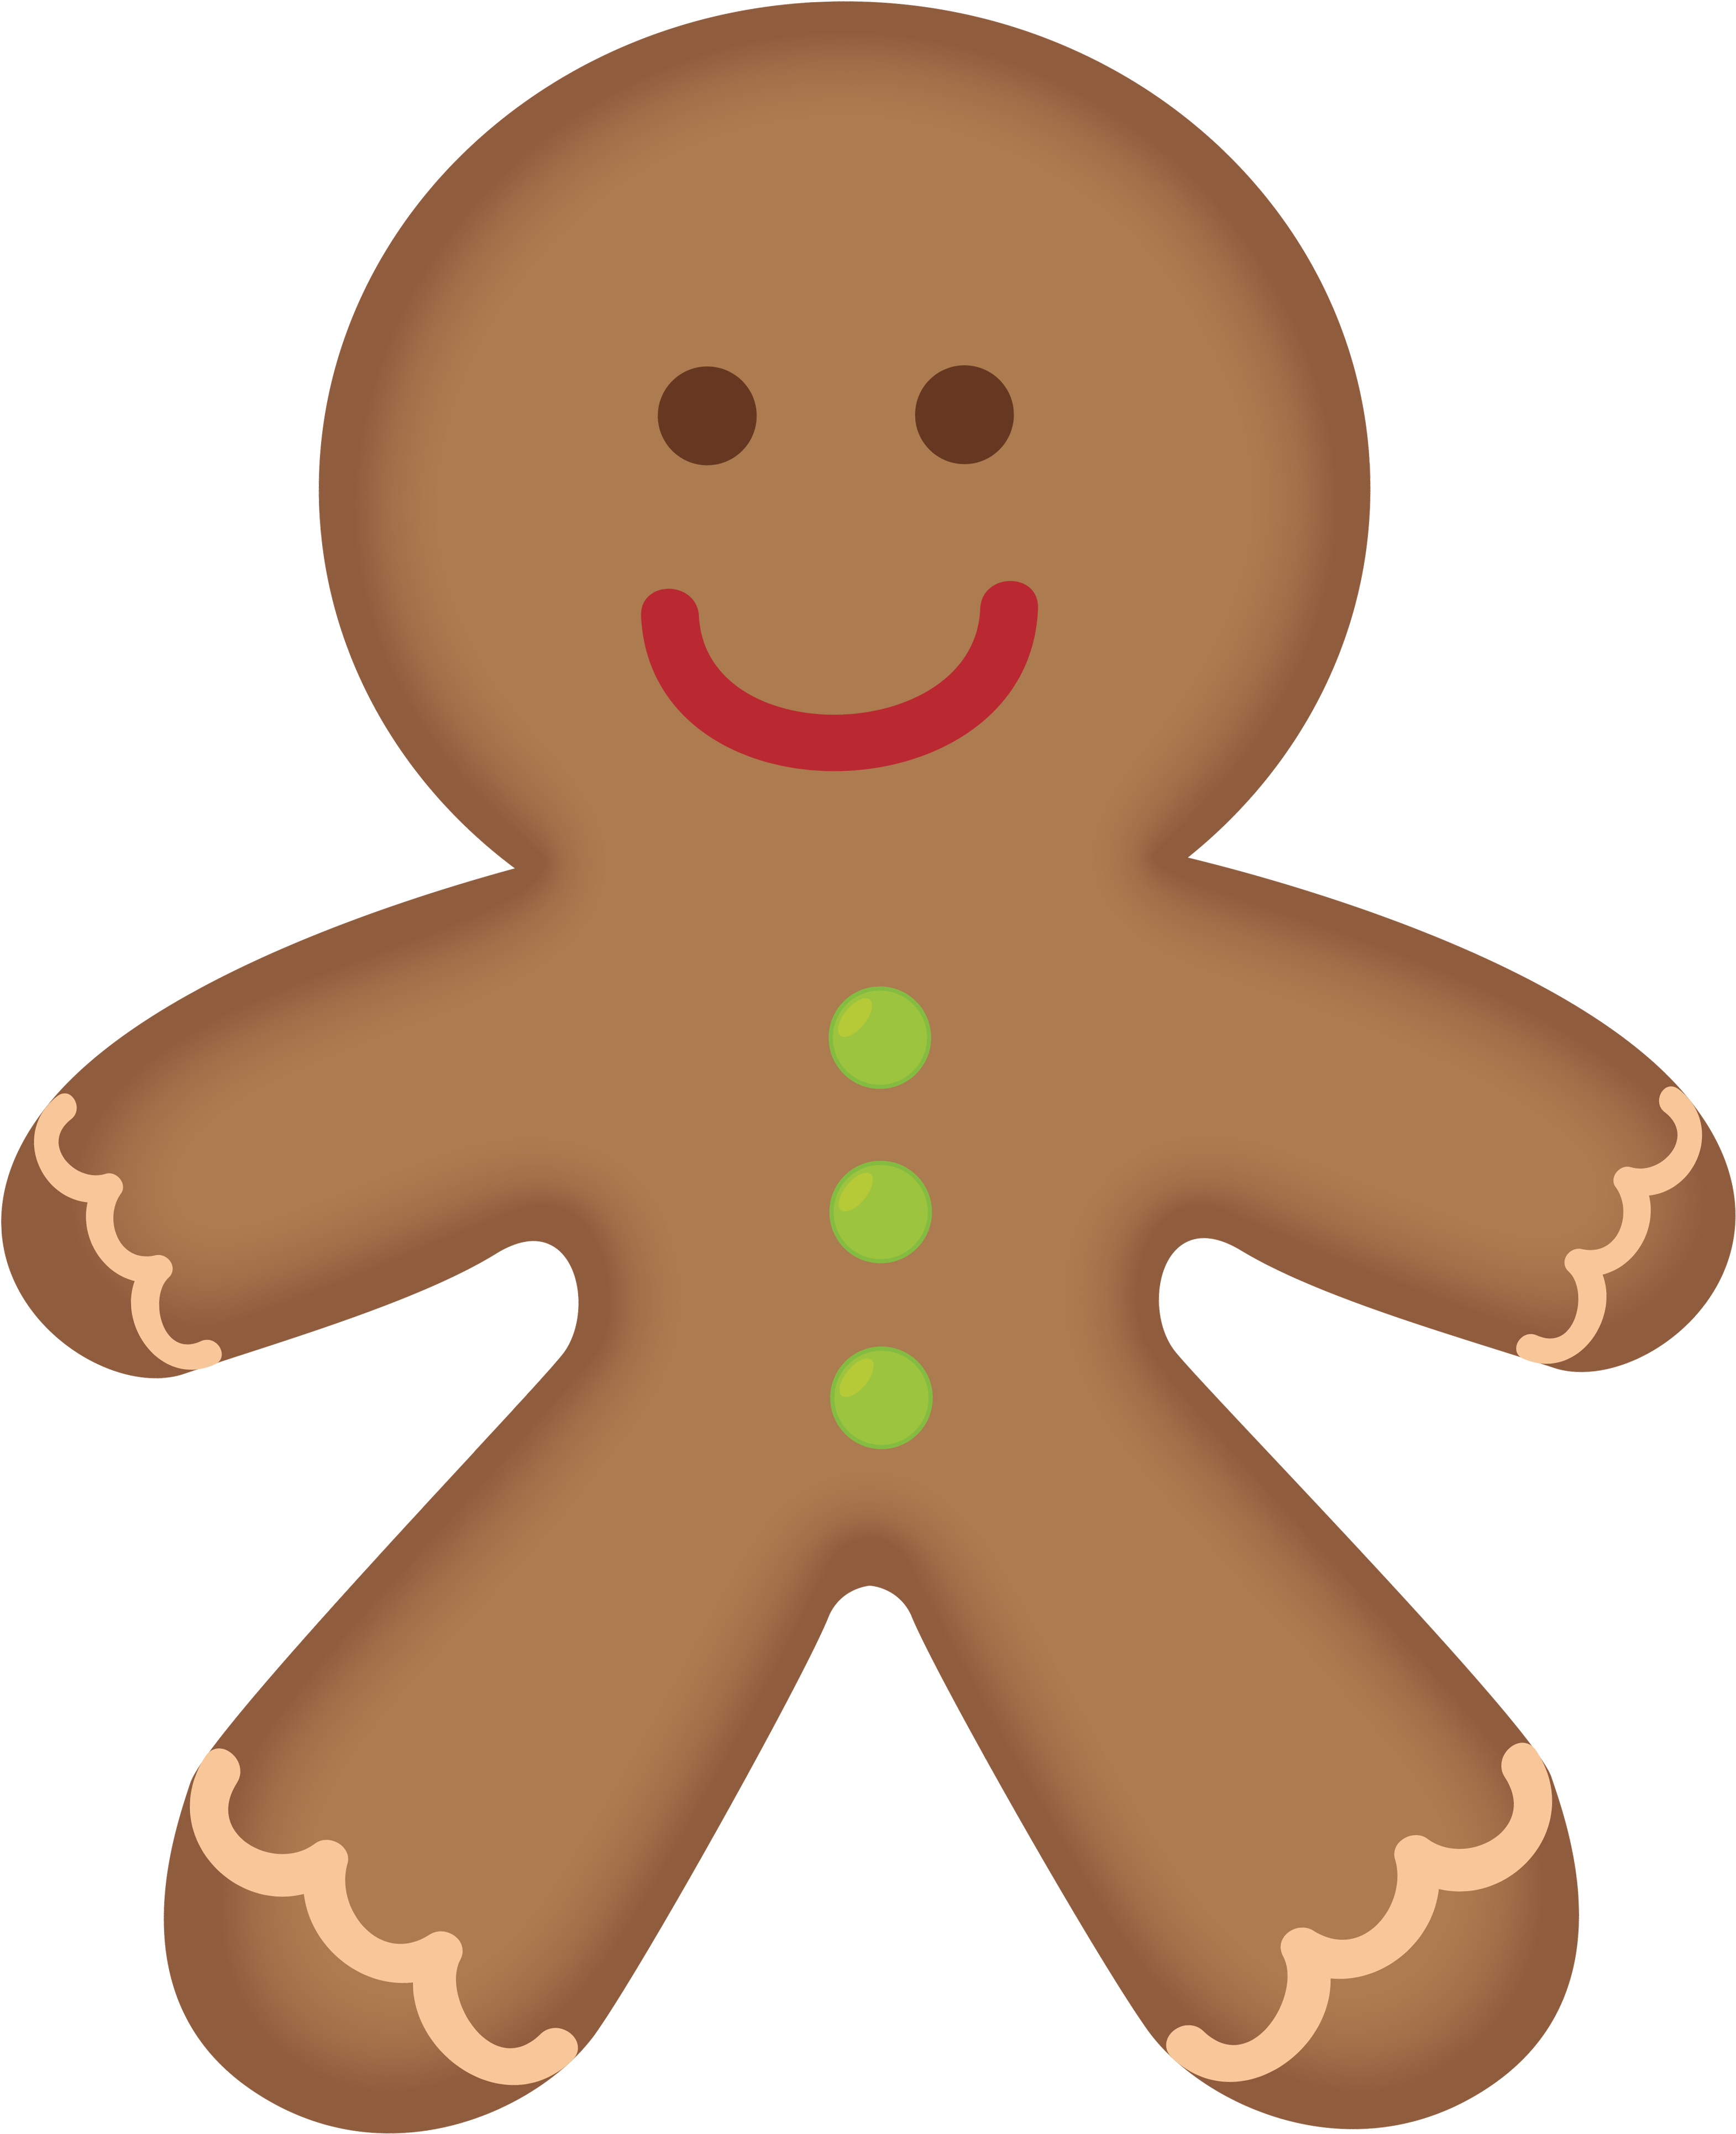 A Gingerbread Man With A Smiling Face